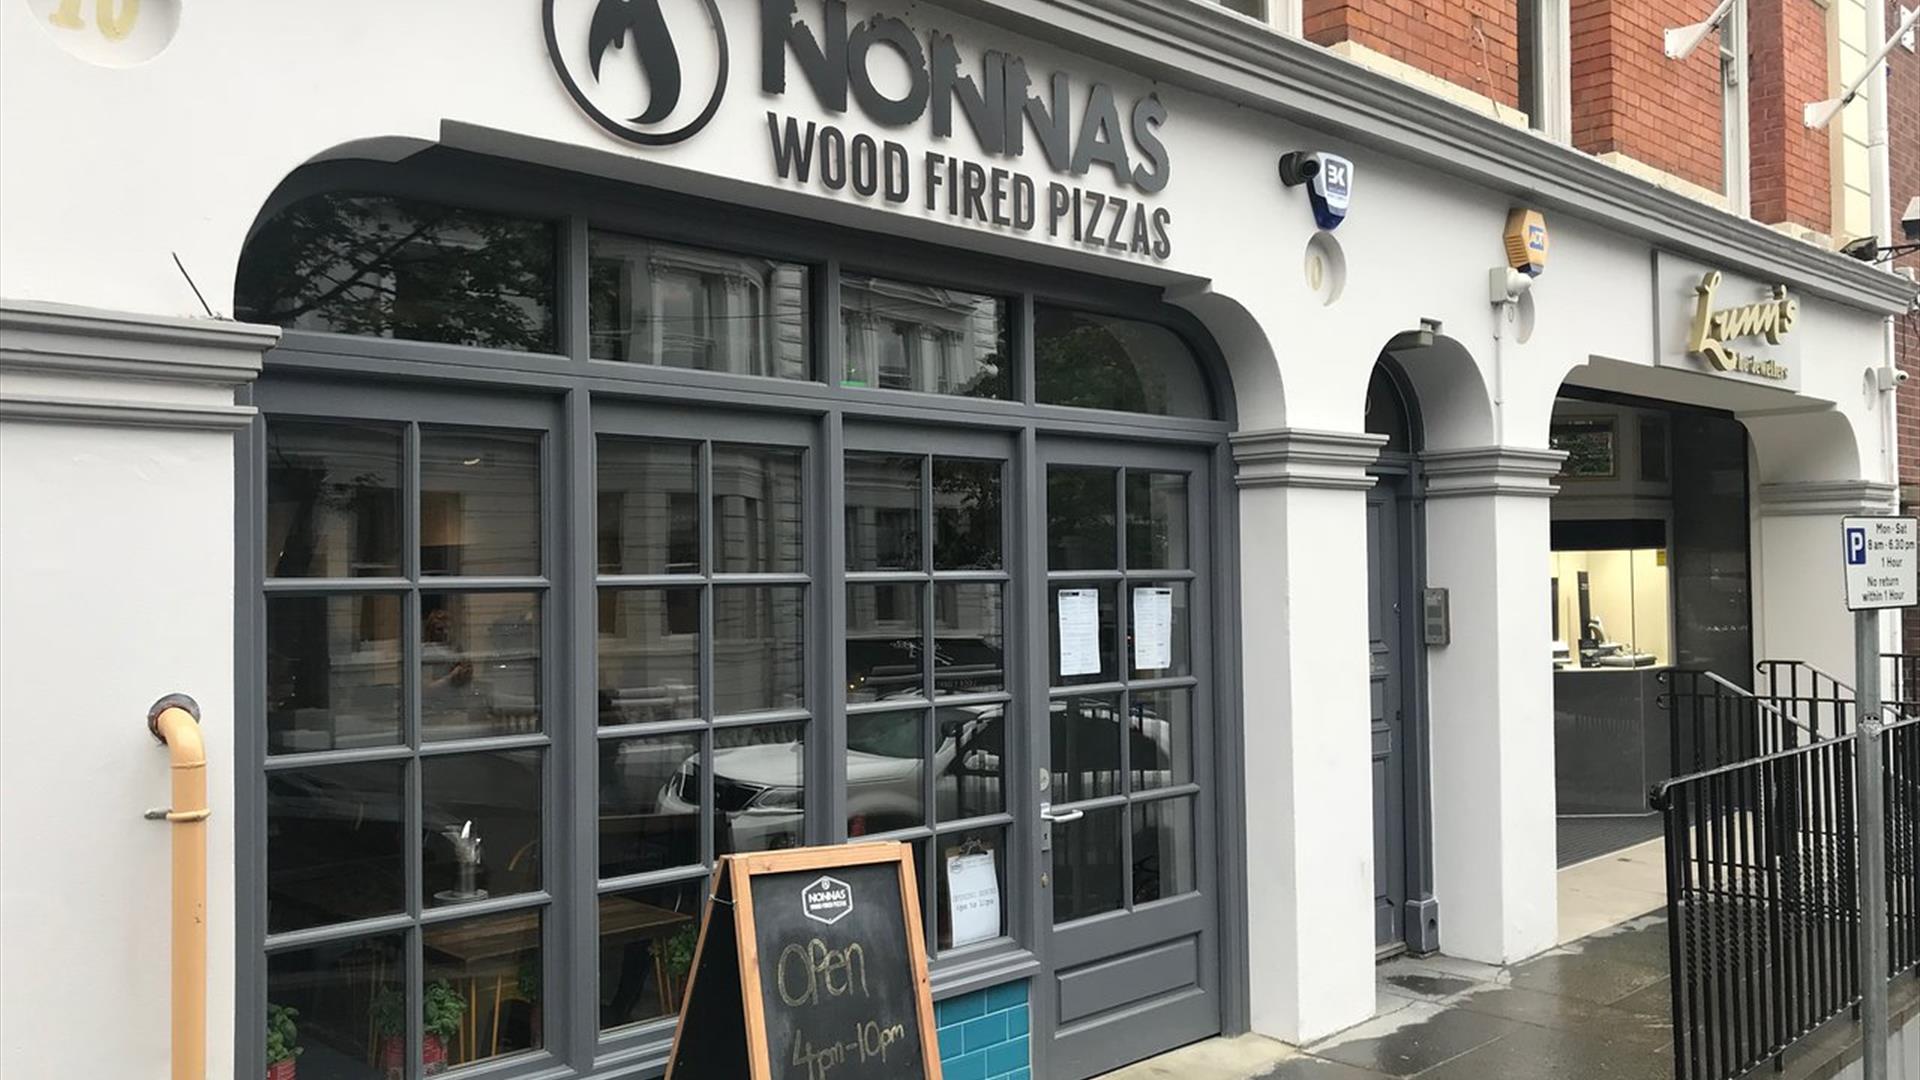 Nonnas Wood Fired Pizza